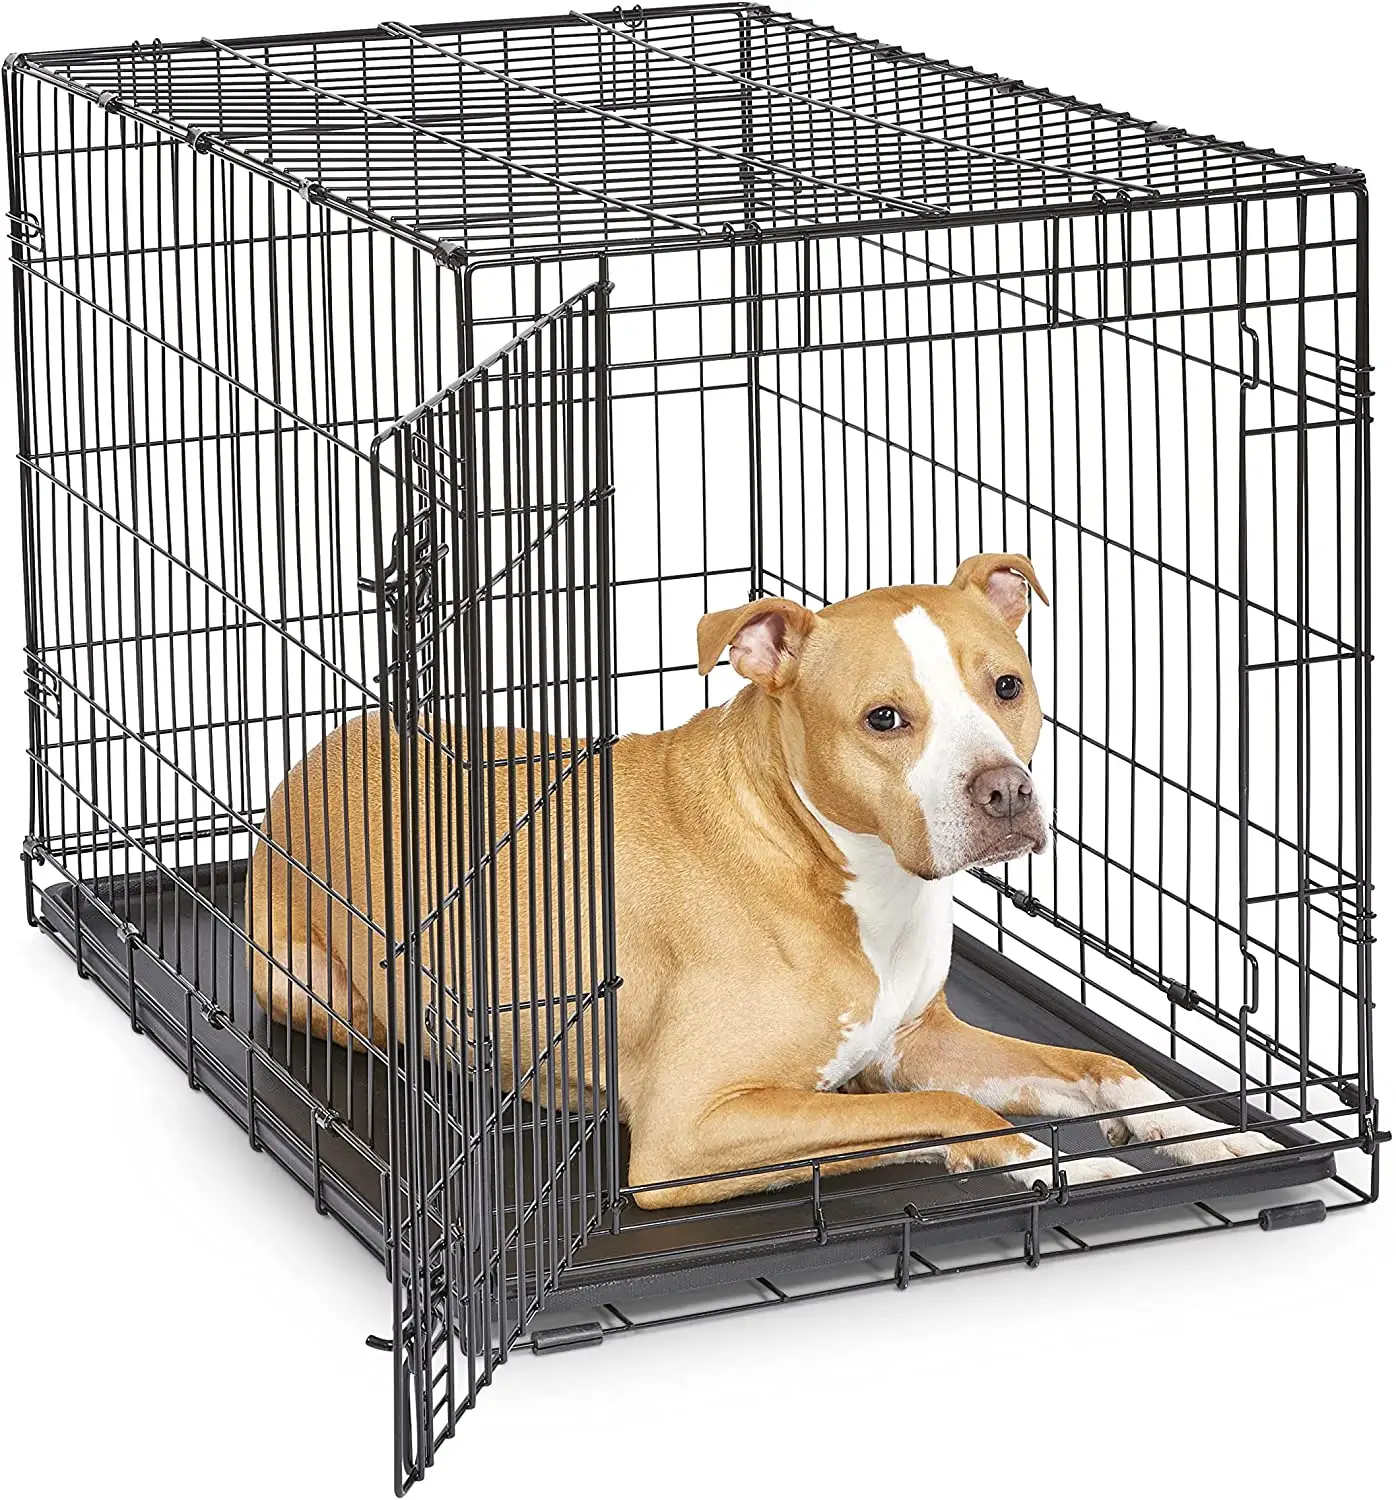 XS size Metal Foldable Pet Cage Dog Crate Kennels In Bedroom Pet Crate Dog Cage With Plastic Tray Duty Durable Stainless Steel